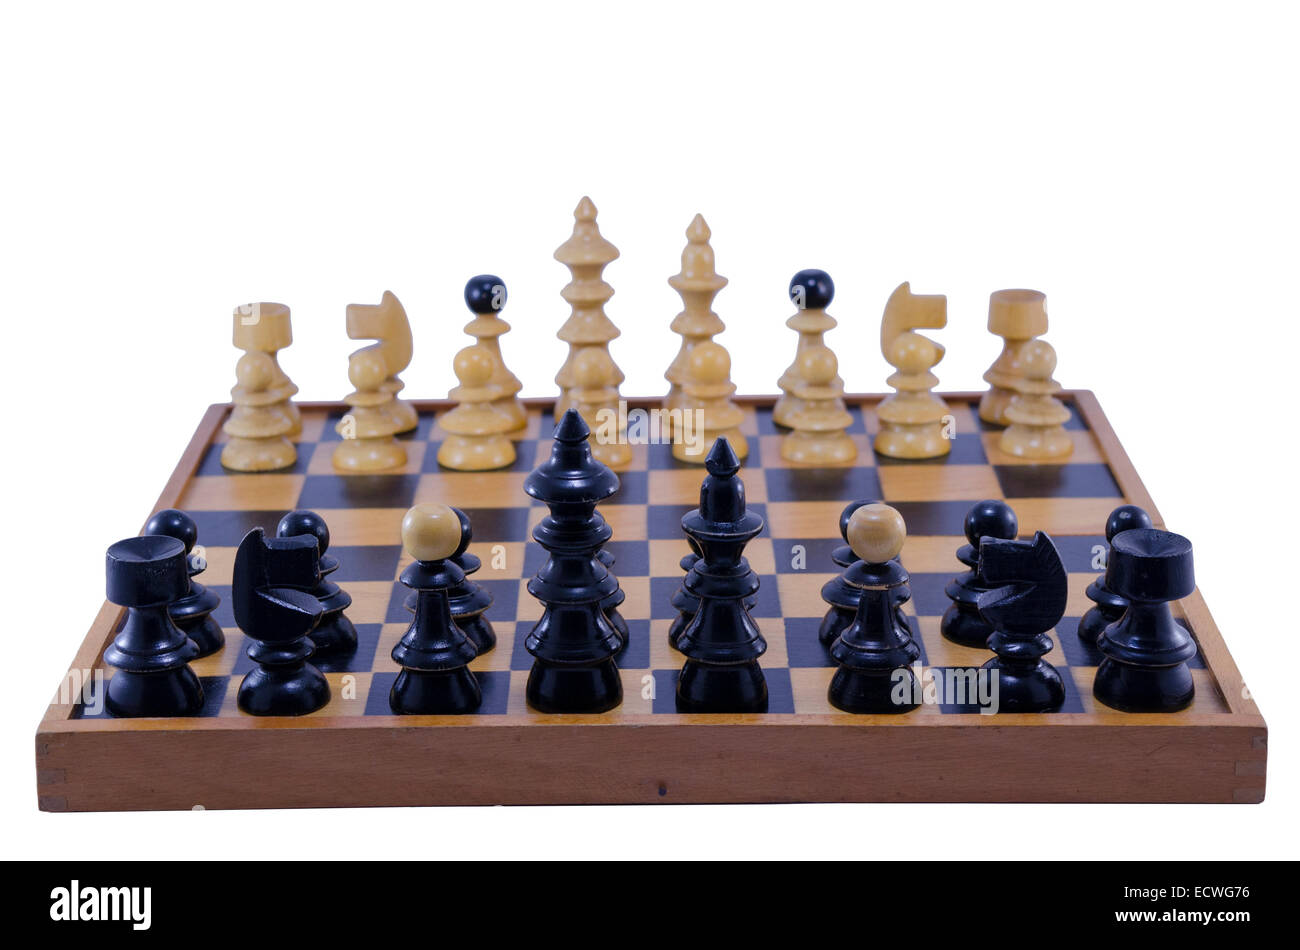 Vintage chess board with chess pieces ready to play, isolated on white Stock Photo